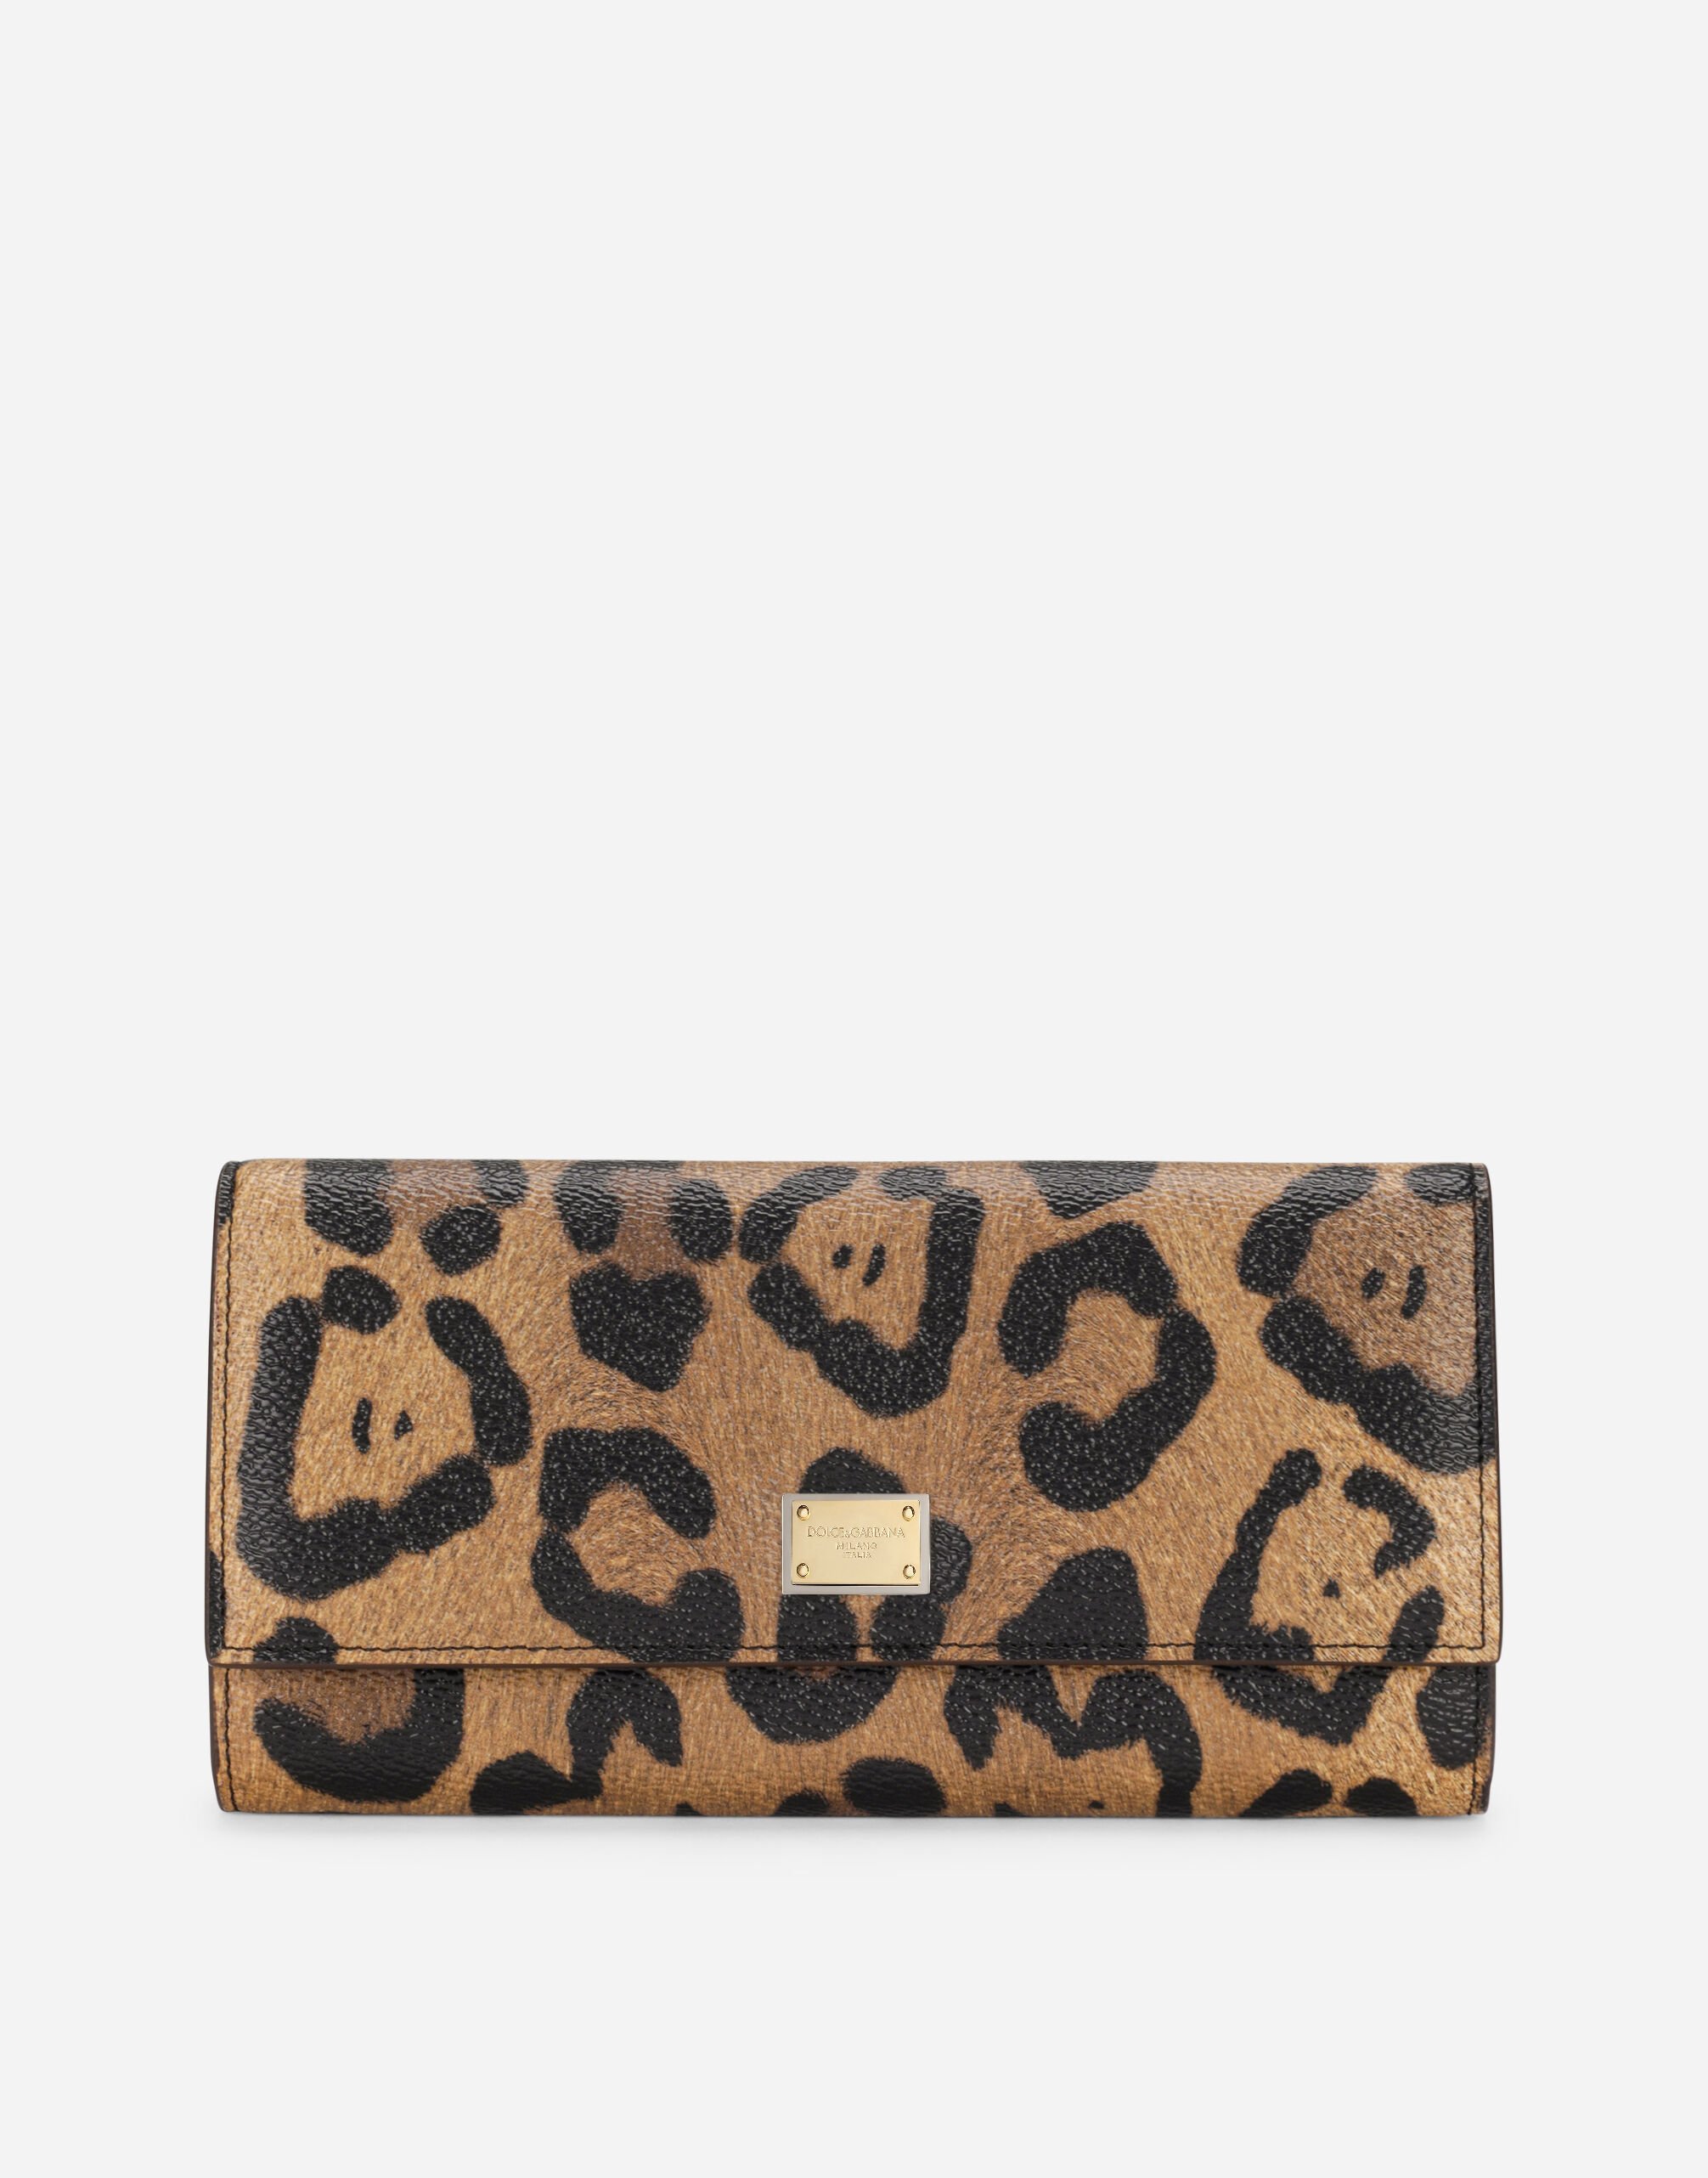 Dolce & Gabbana Leopard-print Crespo continental wallet with branded plate Multicolor BB2211AW384